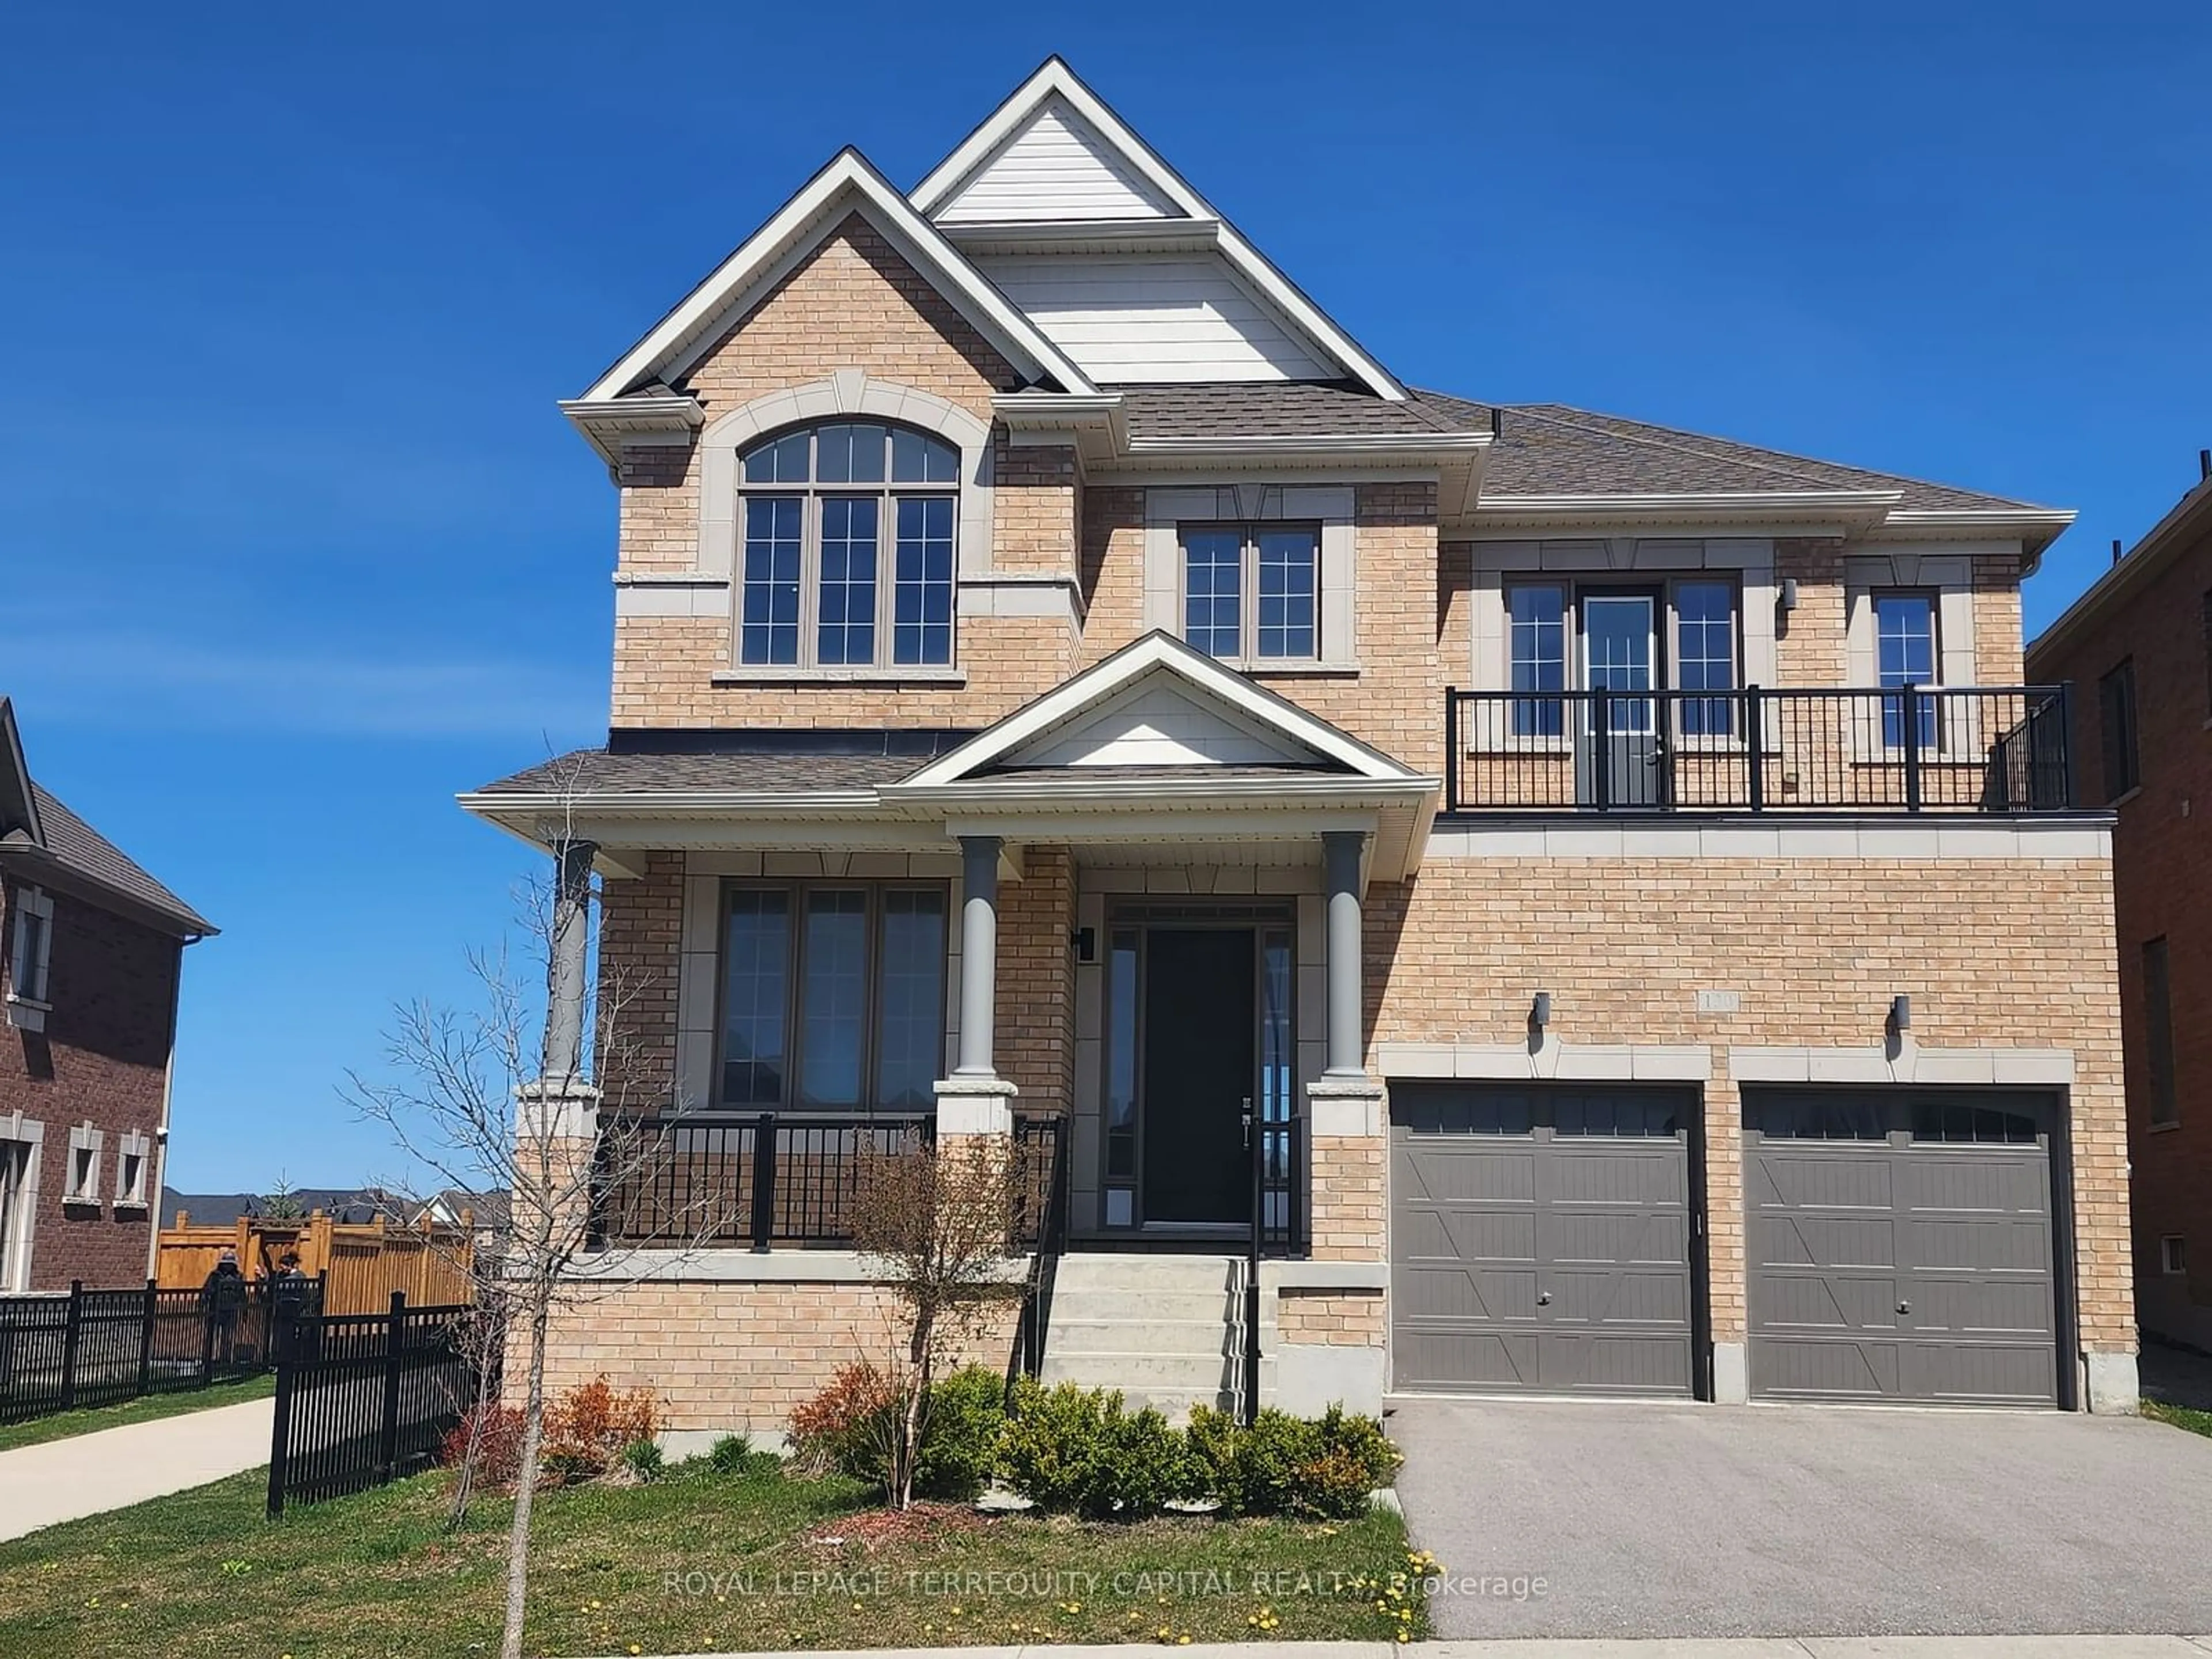 Home with brick exterior material for 130 Frank Kelly Dr, East Gwillimbury Ontario L9N 0V1